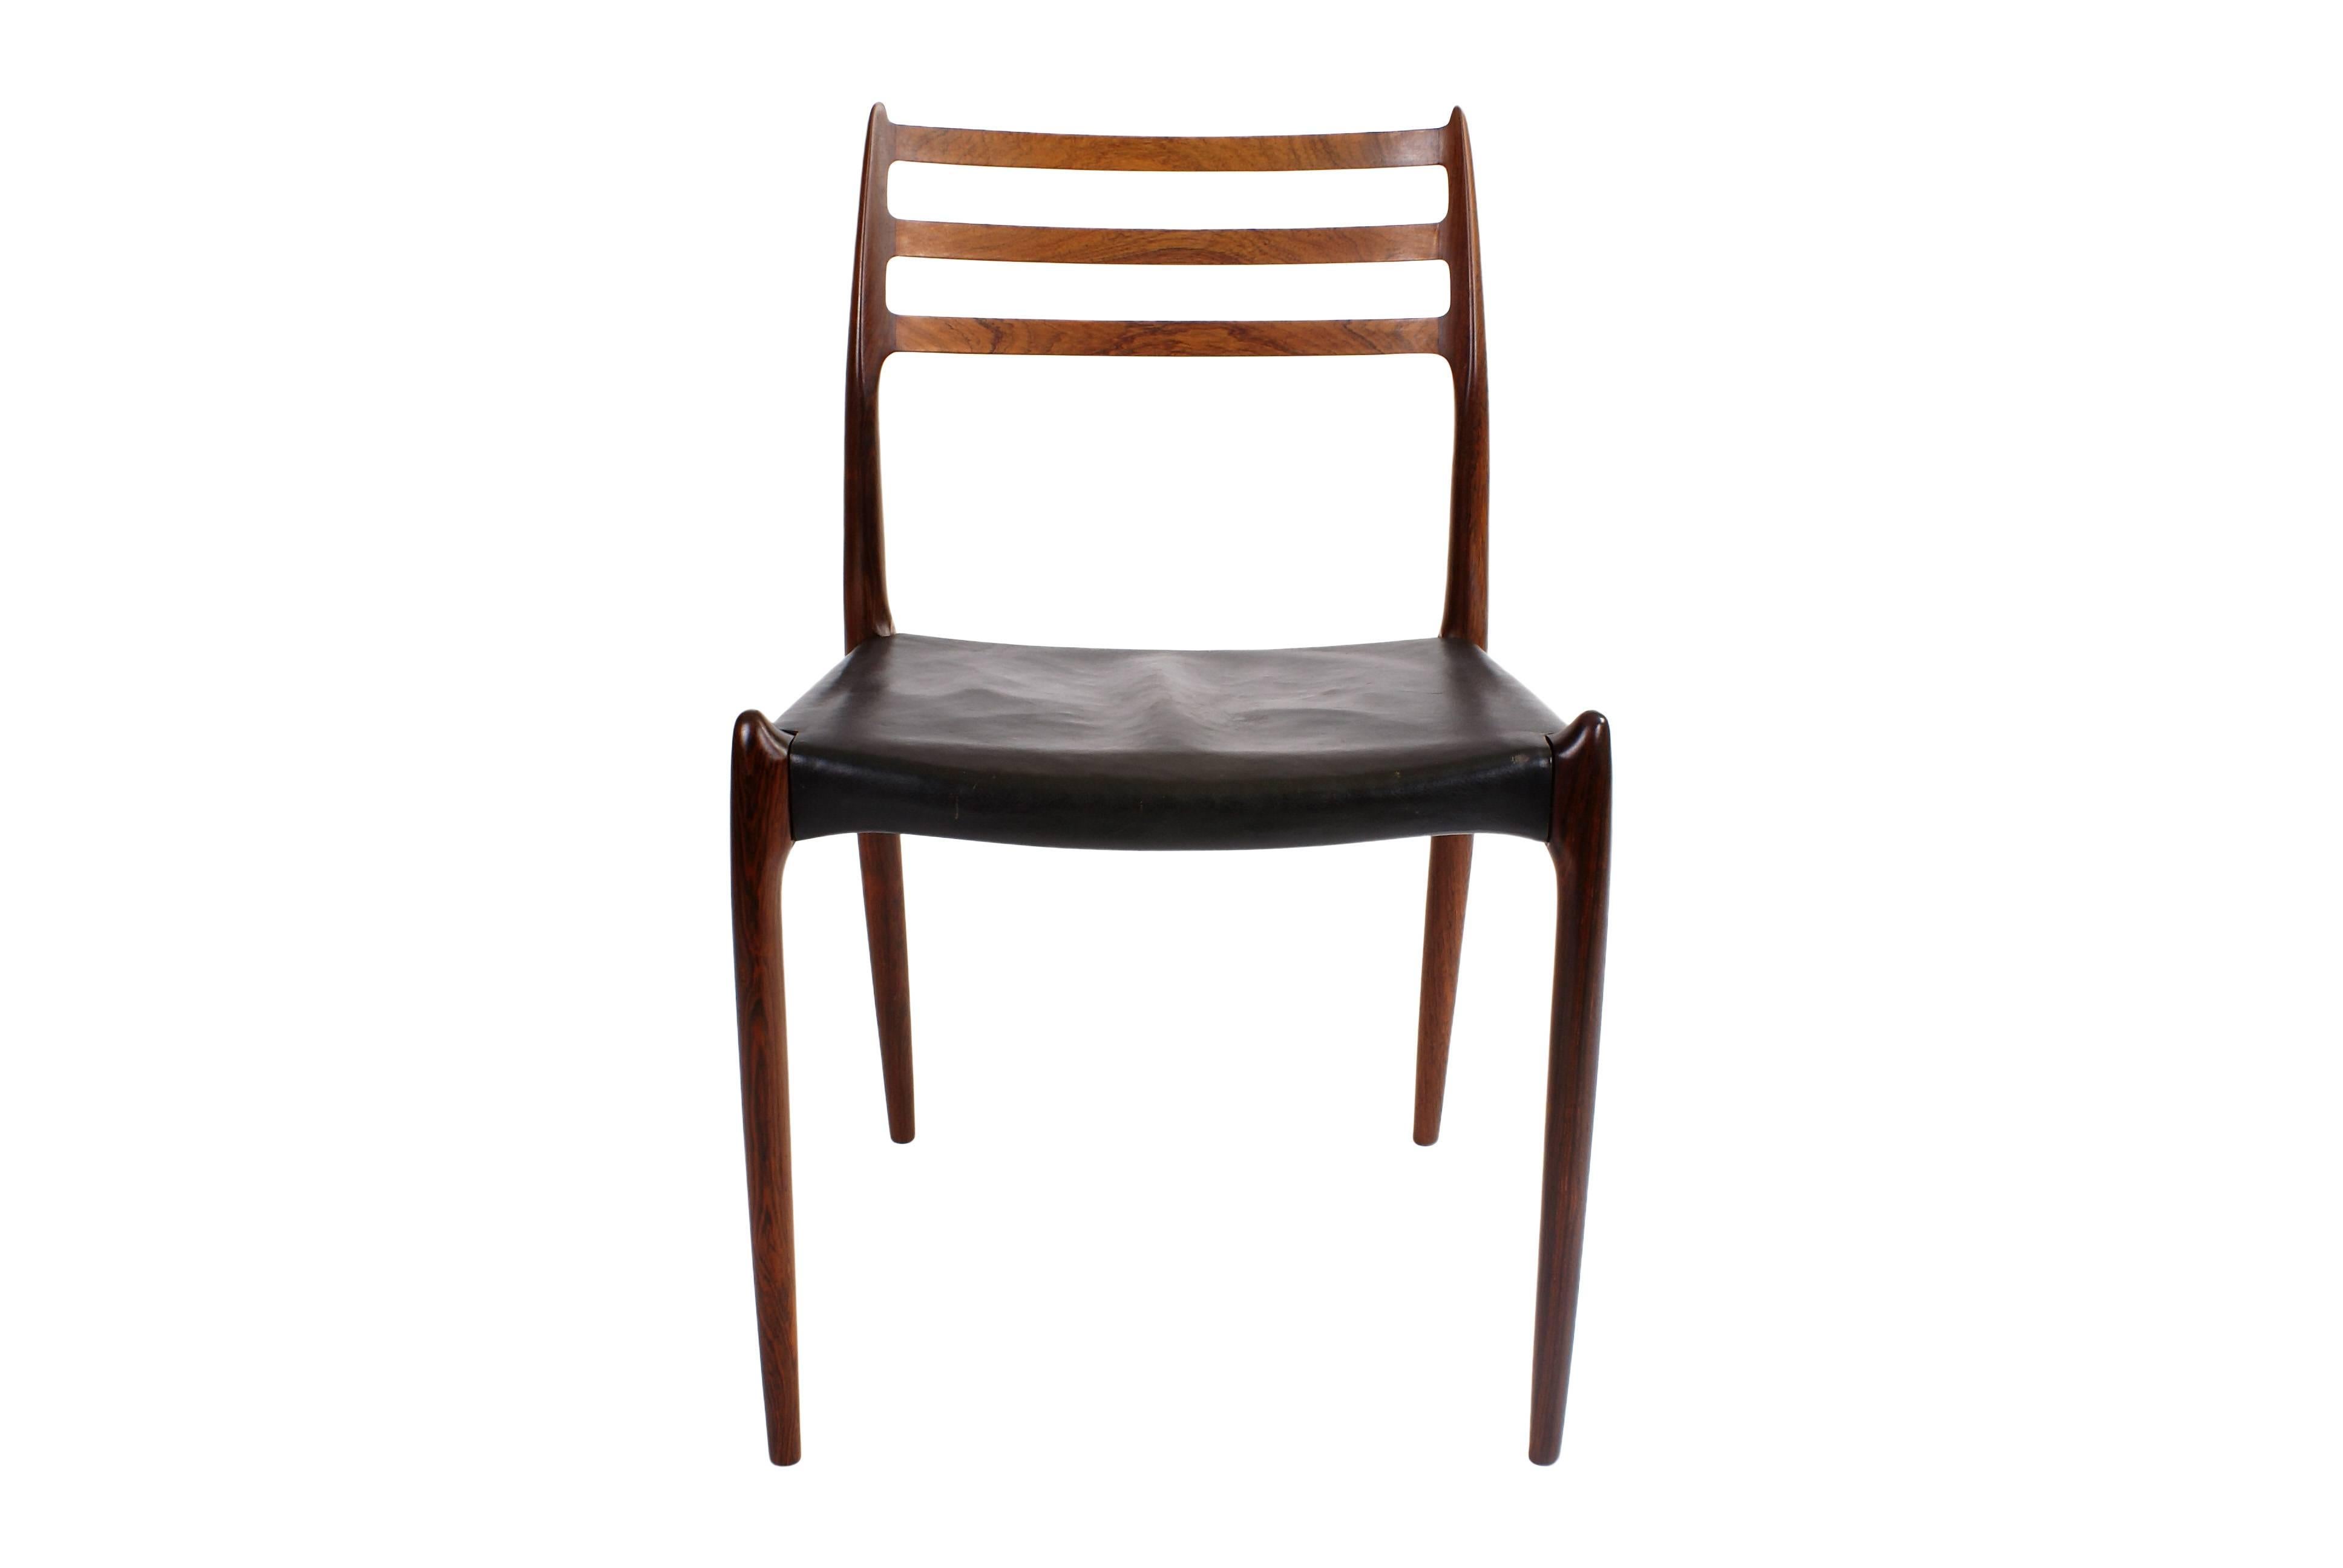 Niels O. Møller set of six Brazilian rosewood dining chairs, horizontal bars in back. Seats with original black leather. Model 78. Designed 1962. Made by J. L. Møller.

The set is in excellent condition.

Price is for the set of six (6) chairs.